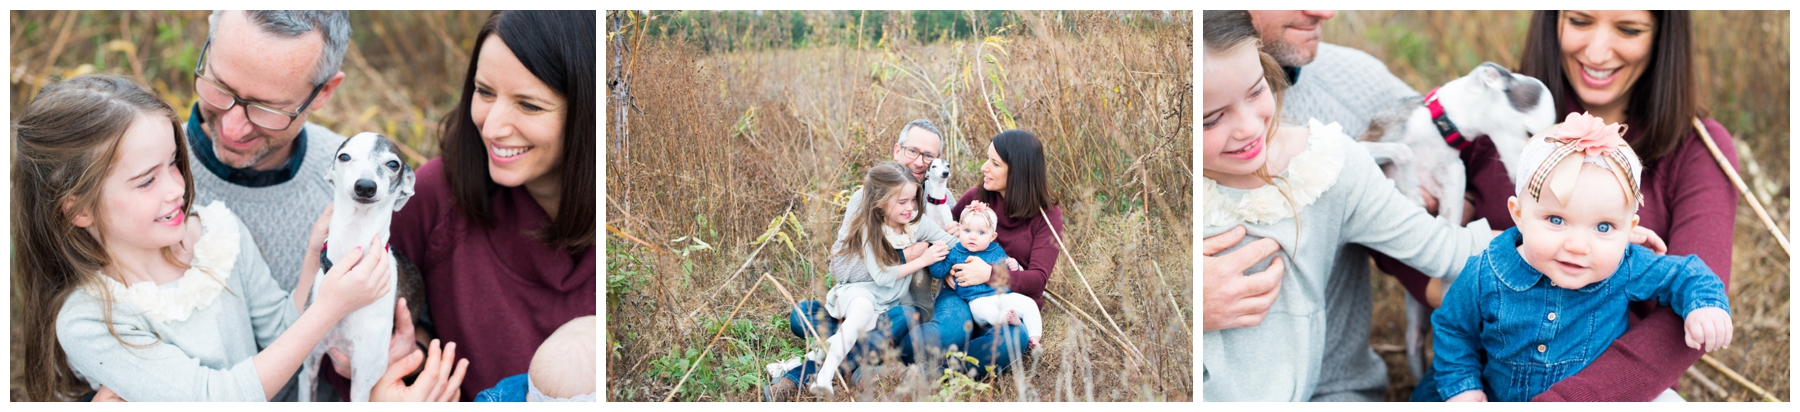 sunrise-family-pictures-at-shawnee-mission-park_0014